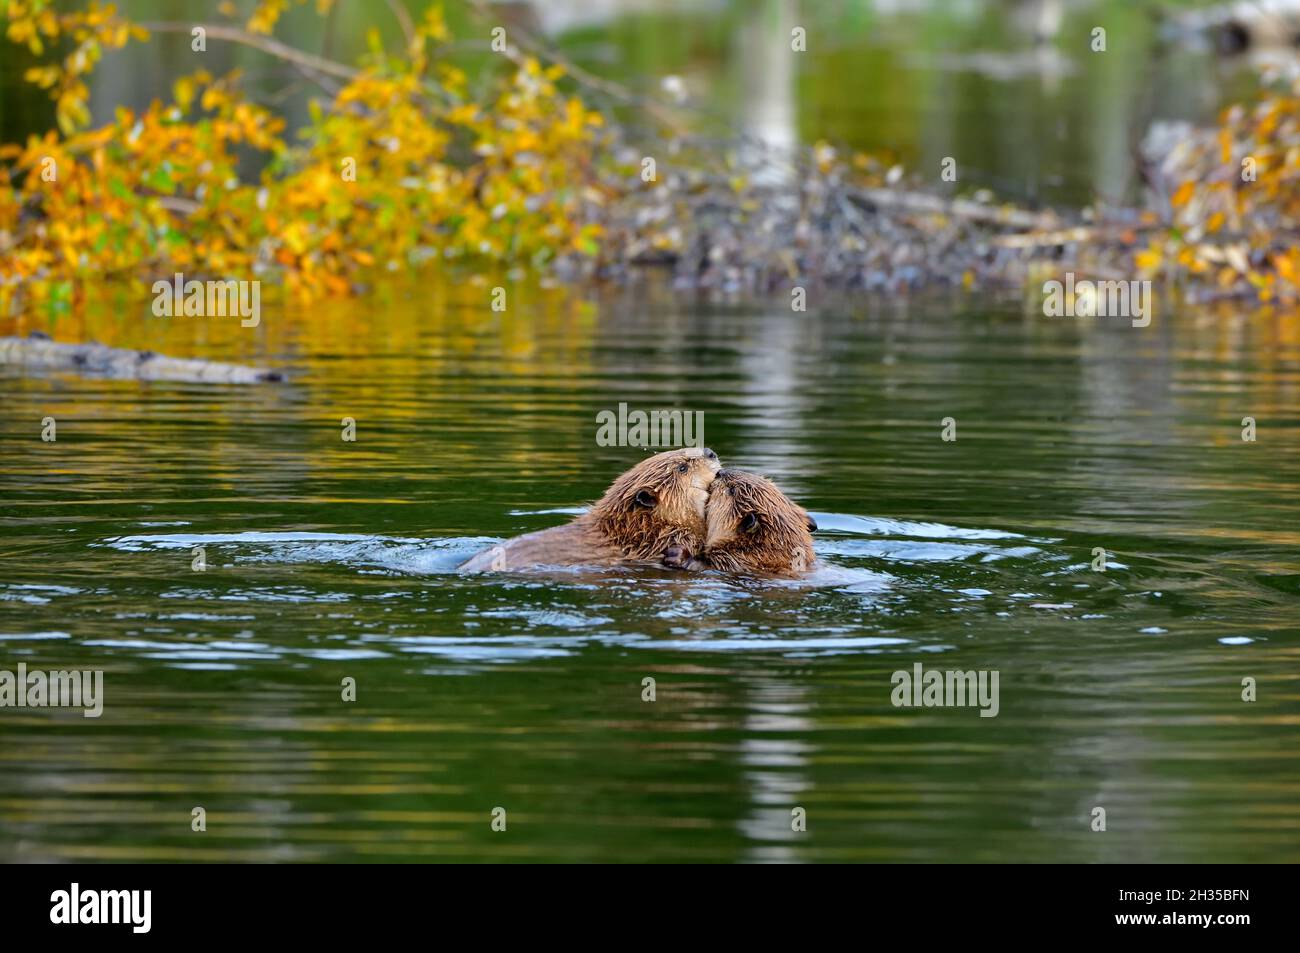 Two young beavers  'Castor canadensis', playing close to the feed storage pile in their beaver pond near Hinton Alberta Canada. Stock Photo